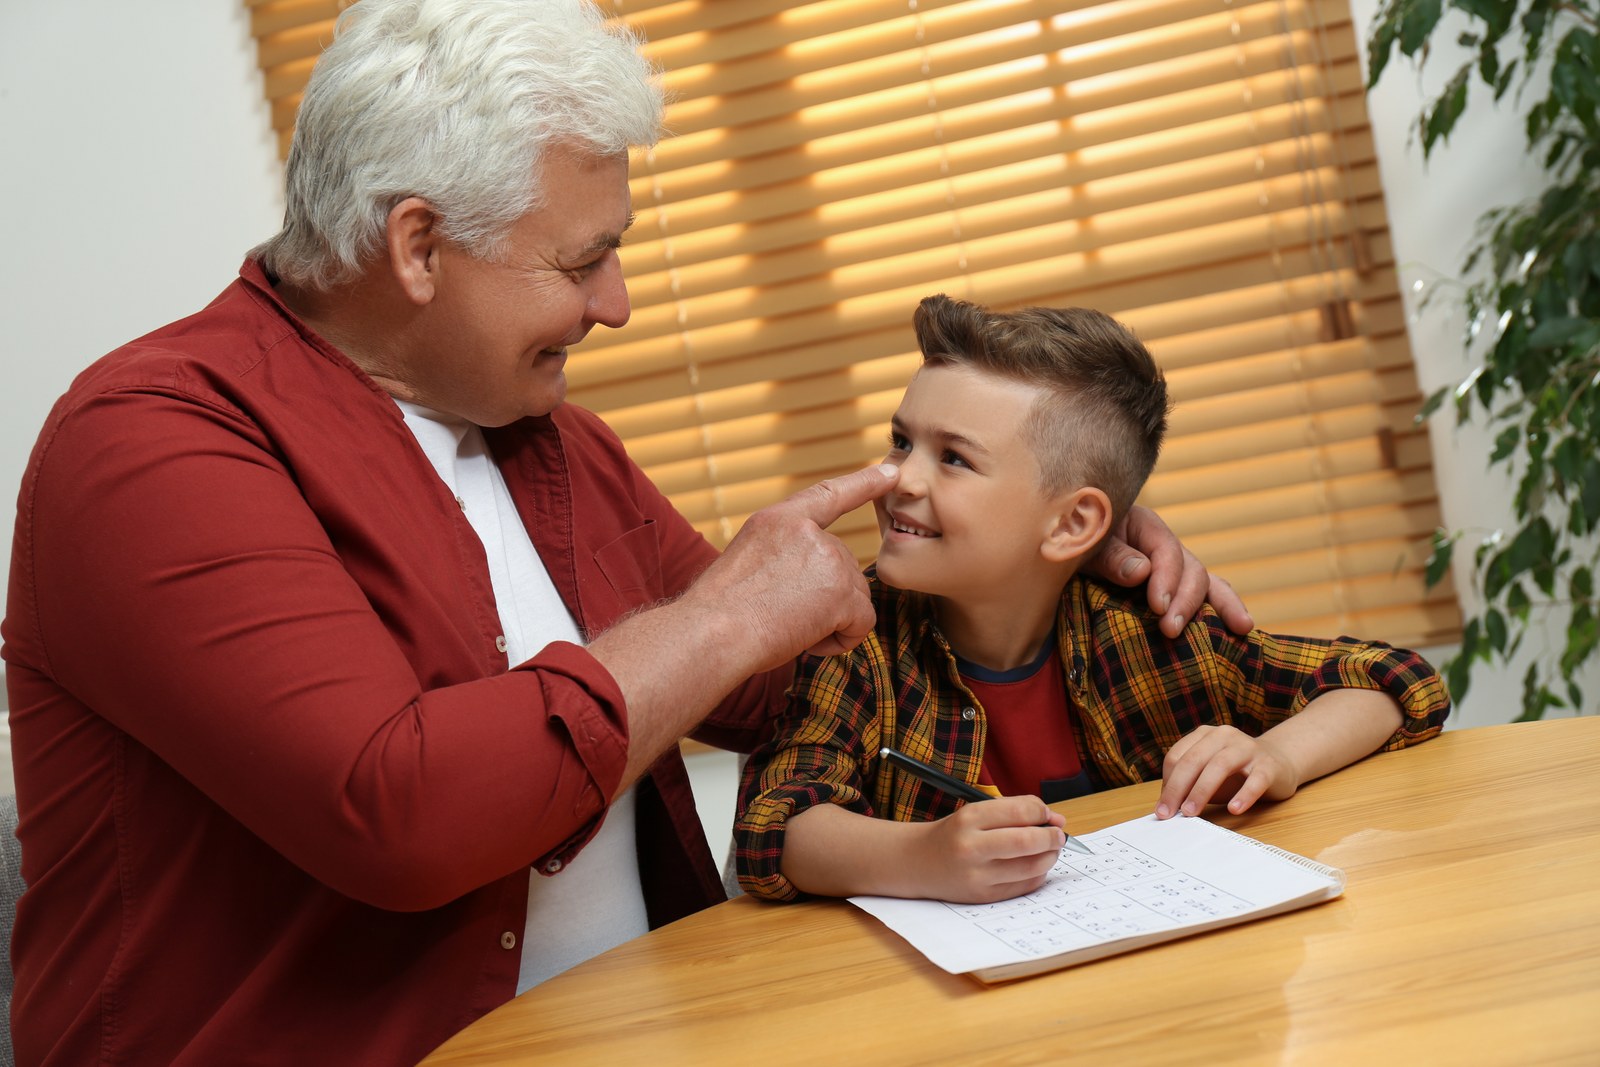 Little boy with his grandfather solving sudoku puzzle at table indoors